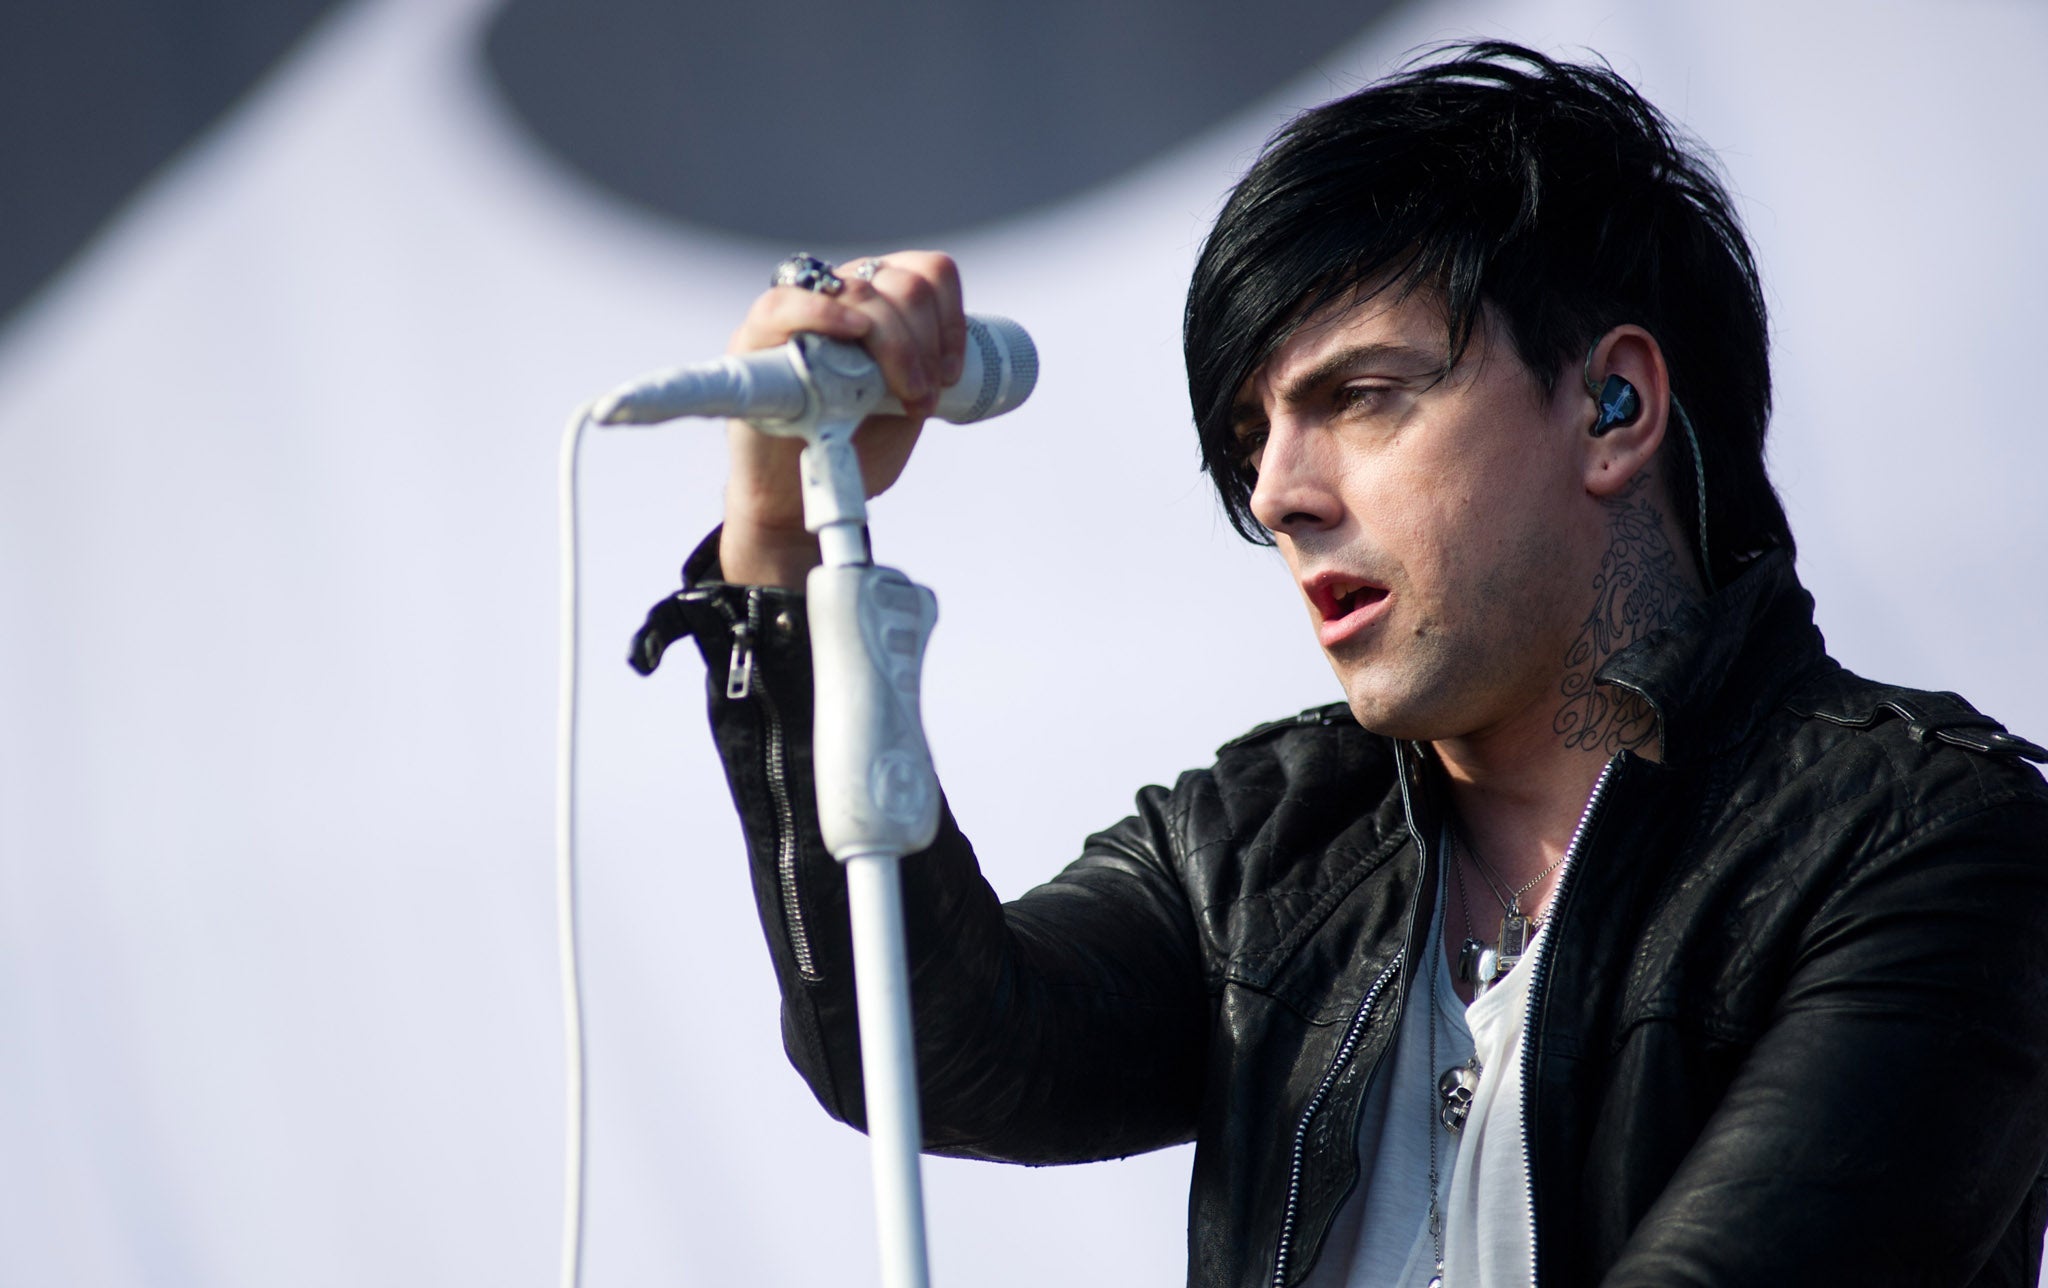 Lostprophets frontman Ian Watkins could make a fortune while serving a sentence for child sex offences